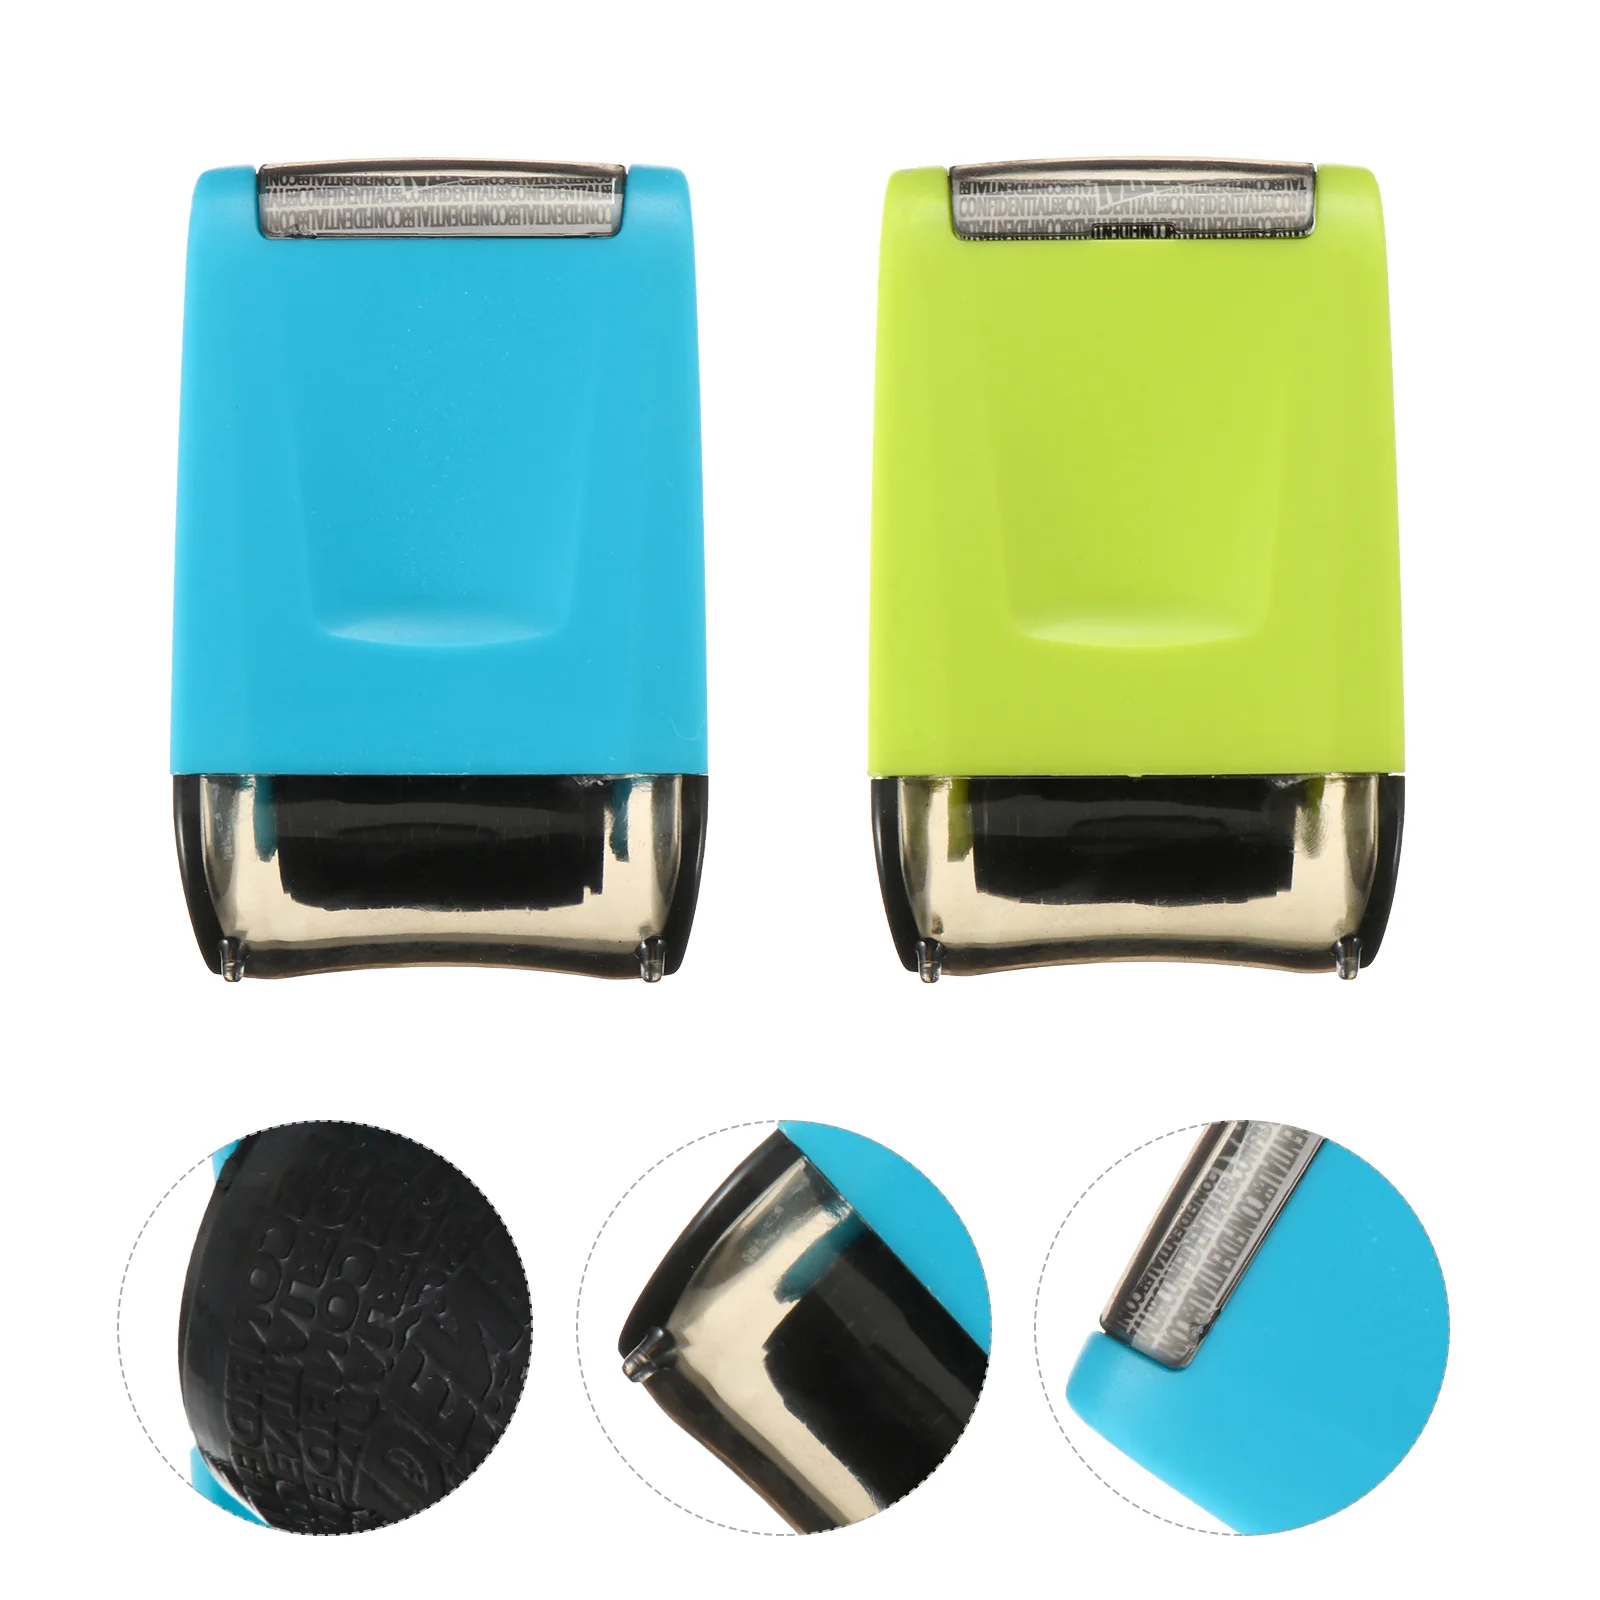 

2 Pcs Name Stamps Convenient Security Hand-held Identity Guard Seals Protection Garbled Privacy Plastic Theft Prevention